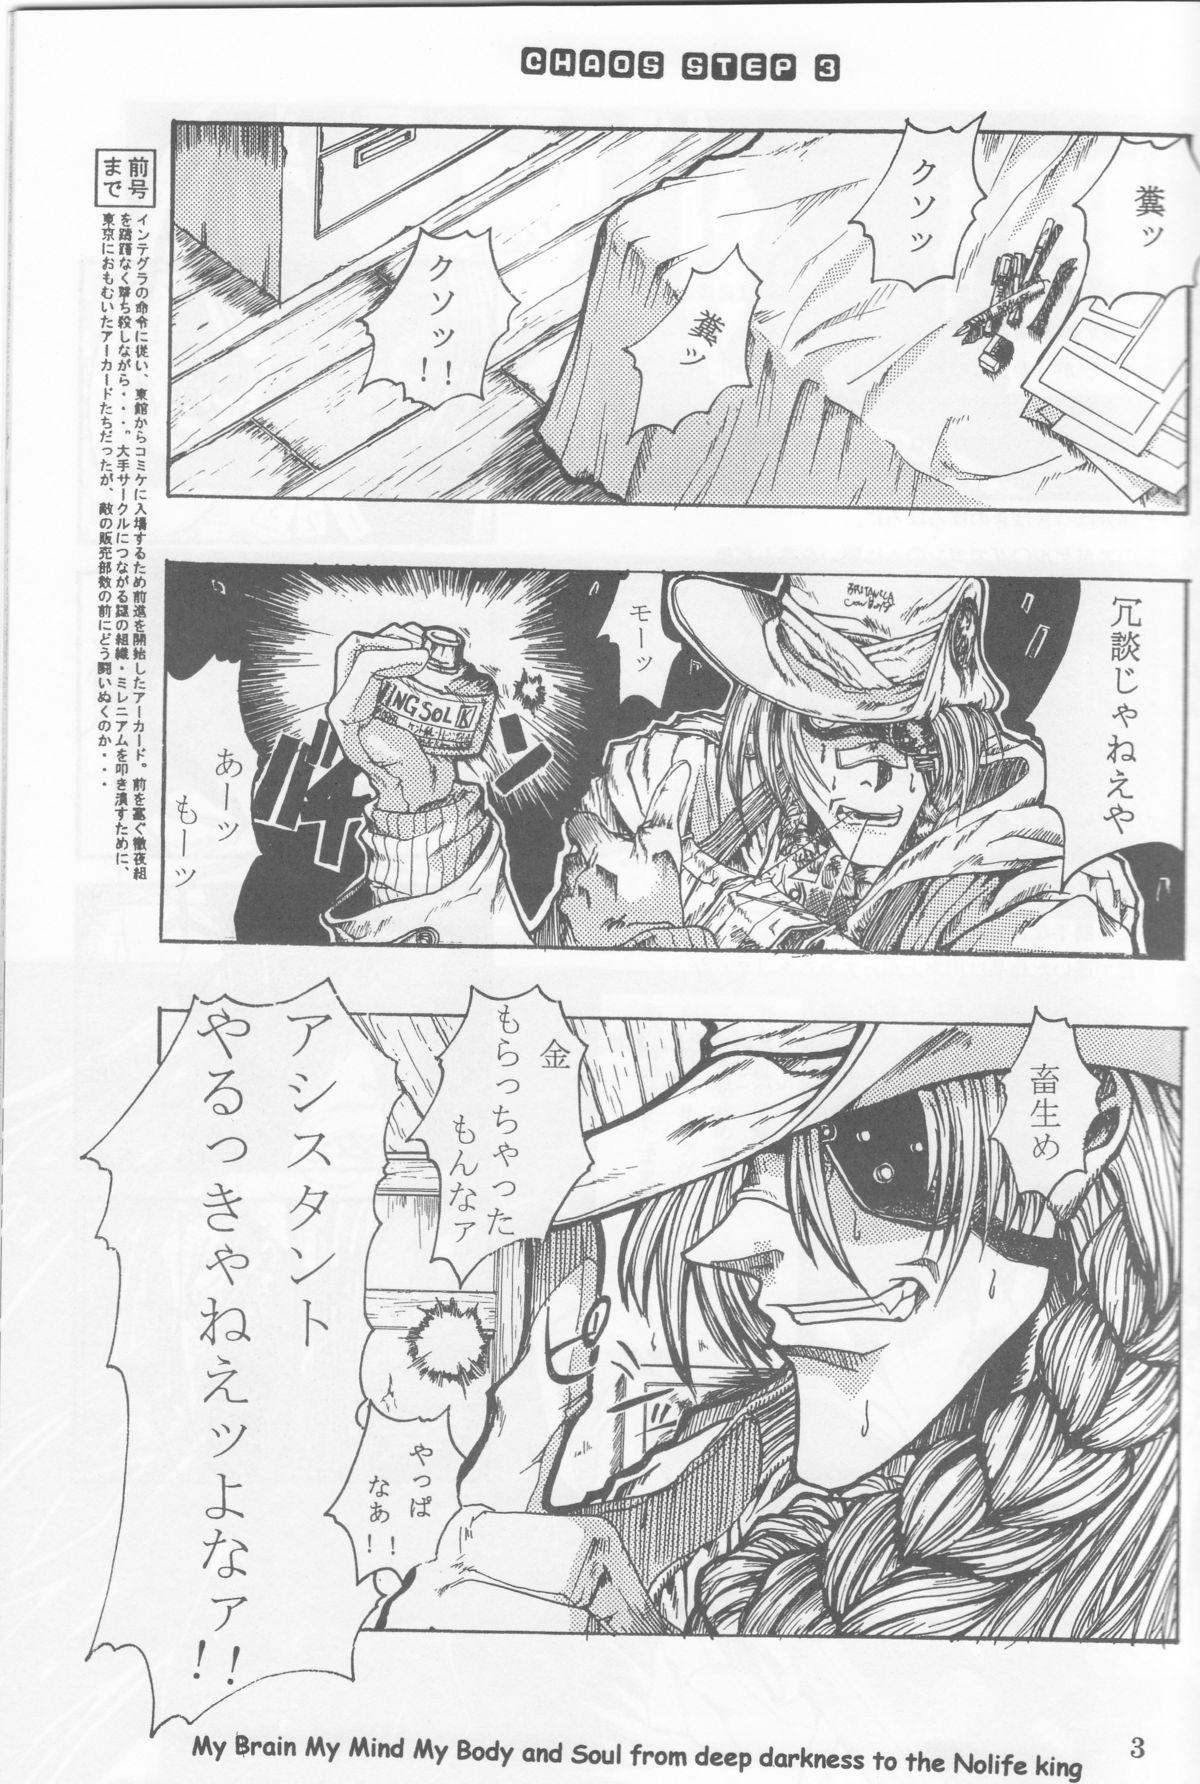 Hot Whores Chaos Step 3 - Hellsing Flexible - Page 2